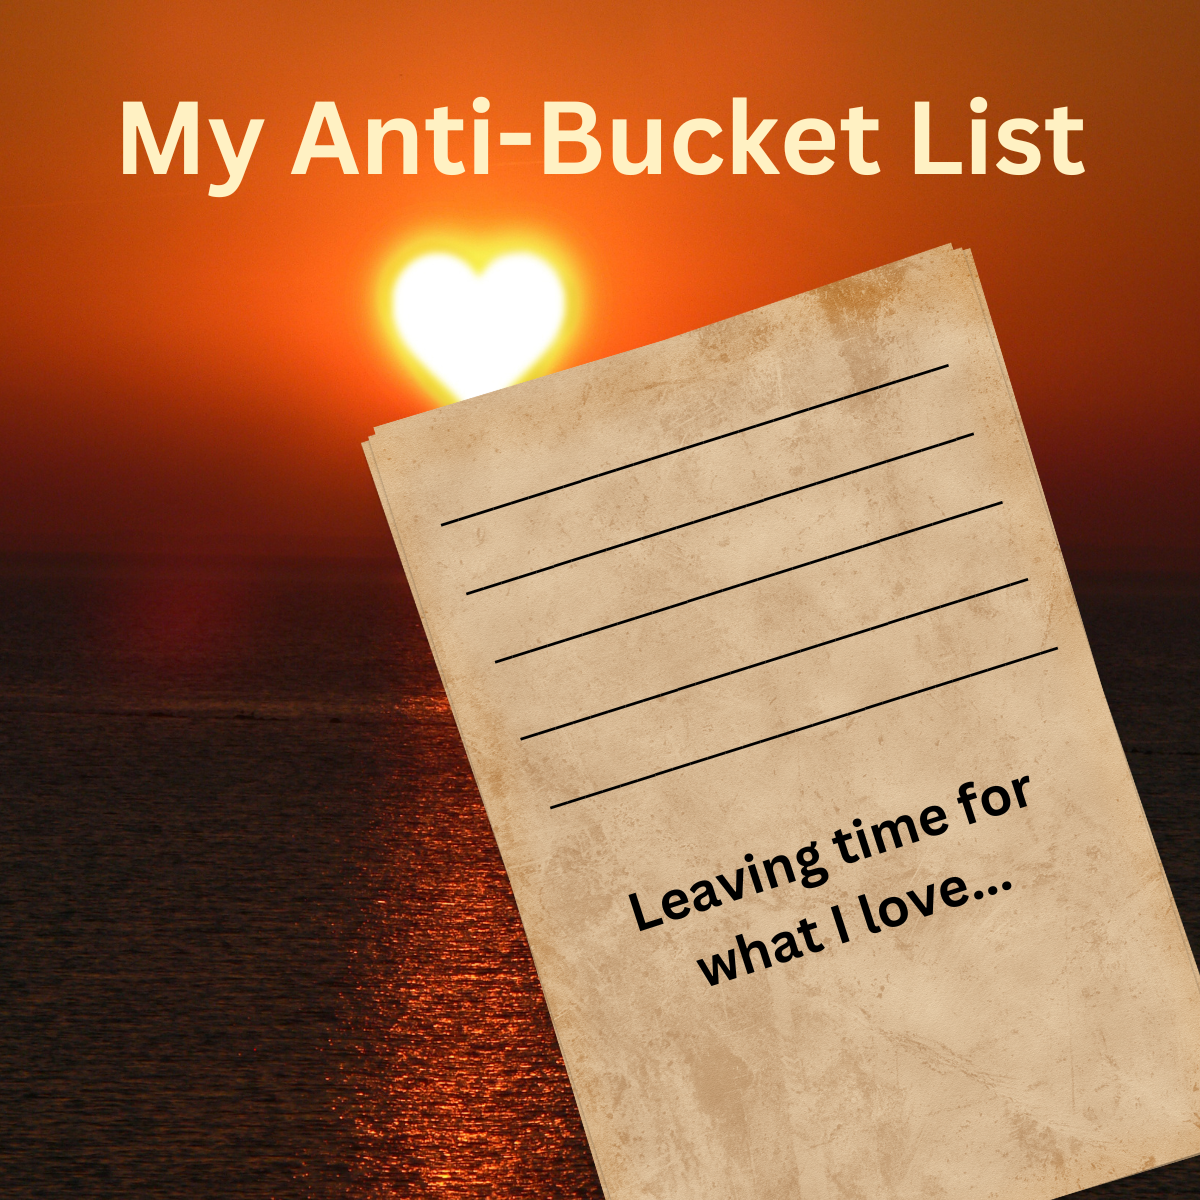 Creating An Anti-Bucket List. Leaving time for what you love, by Janine  Vanderburg, Crow's Feet